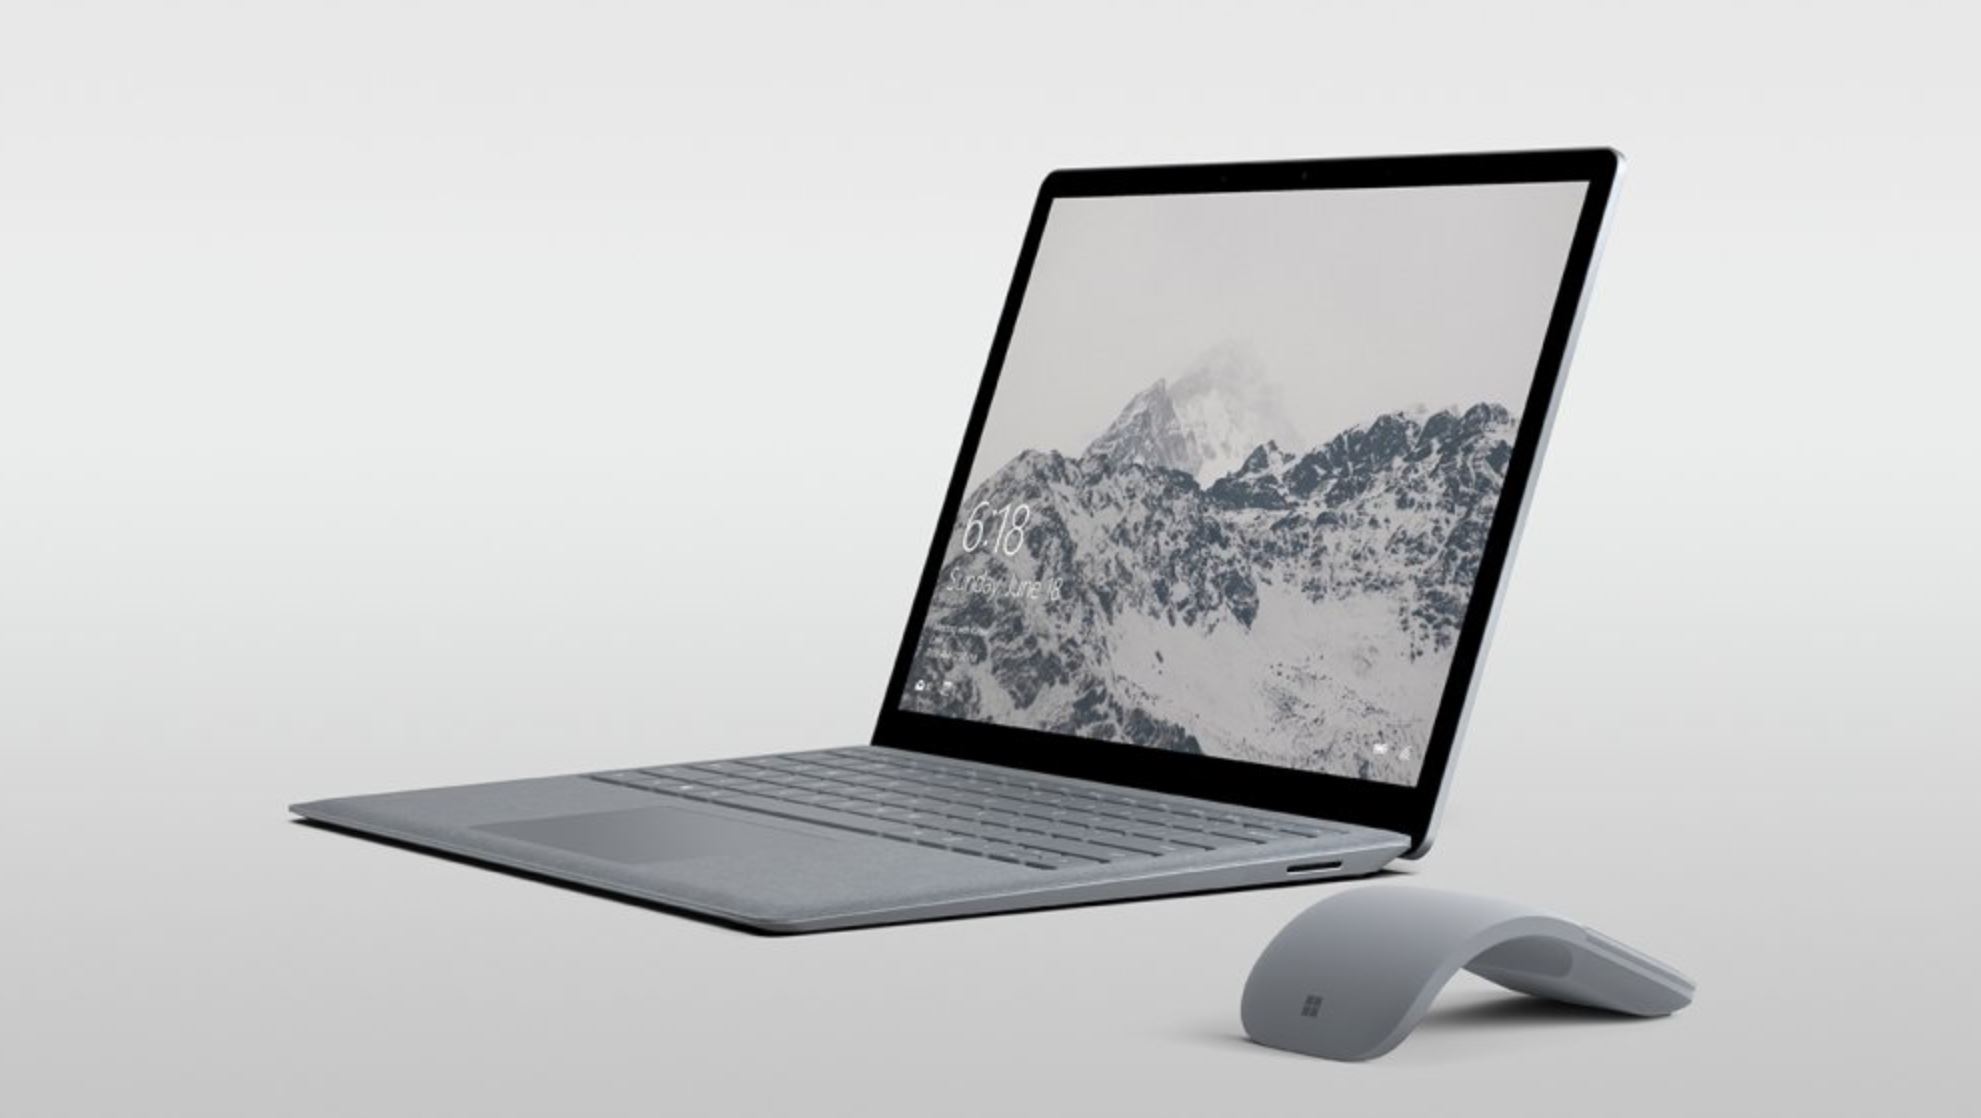 New Surface laptop launches for students, runs Windows 10 S